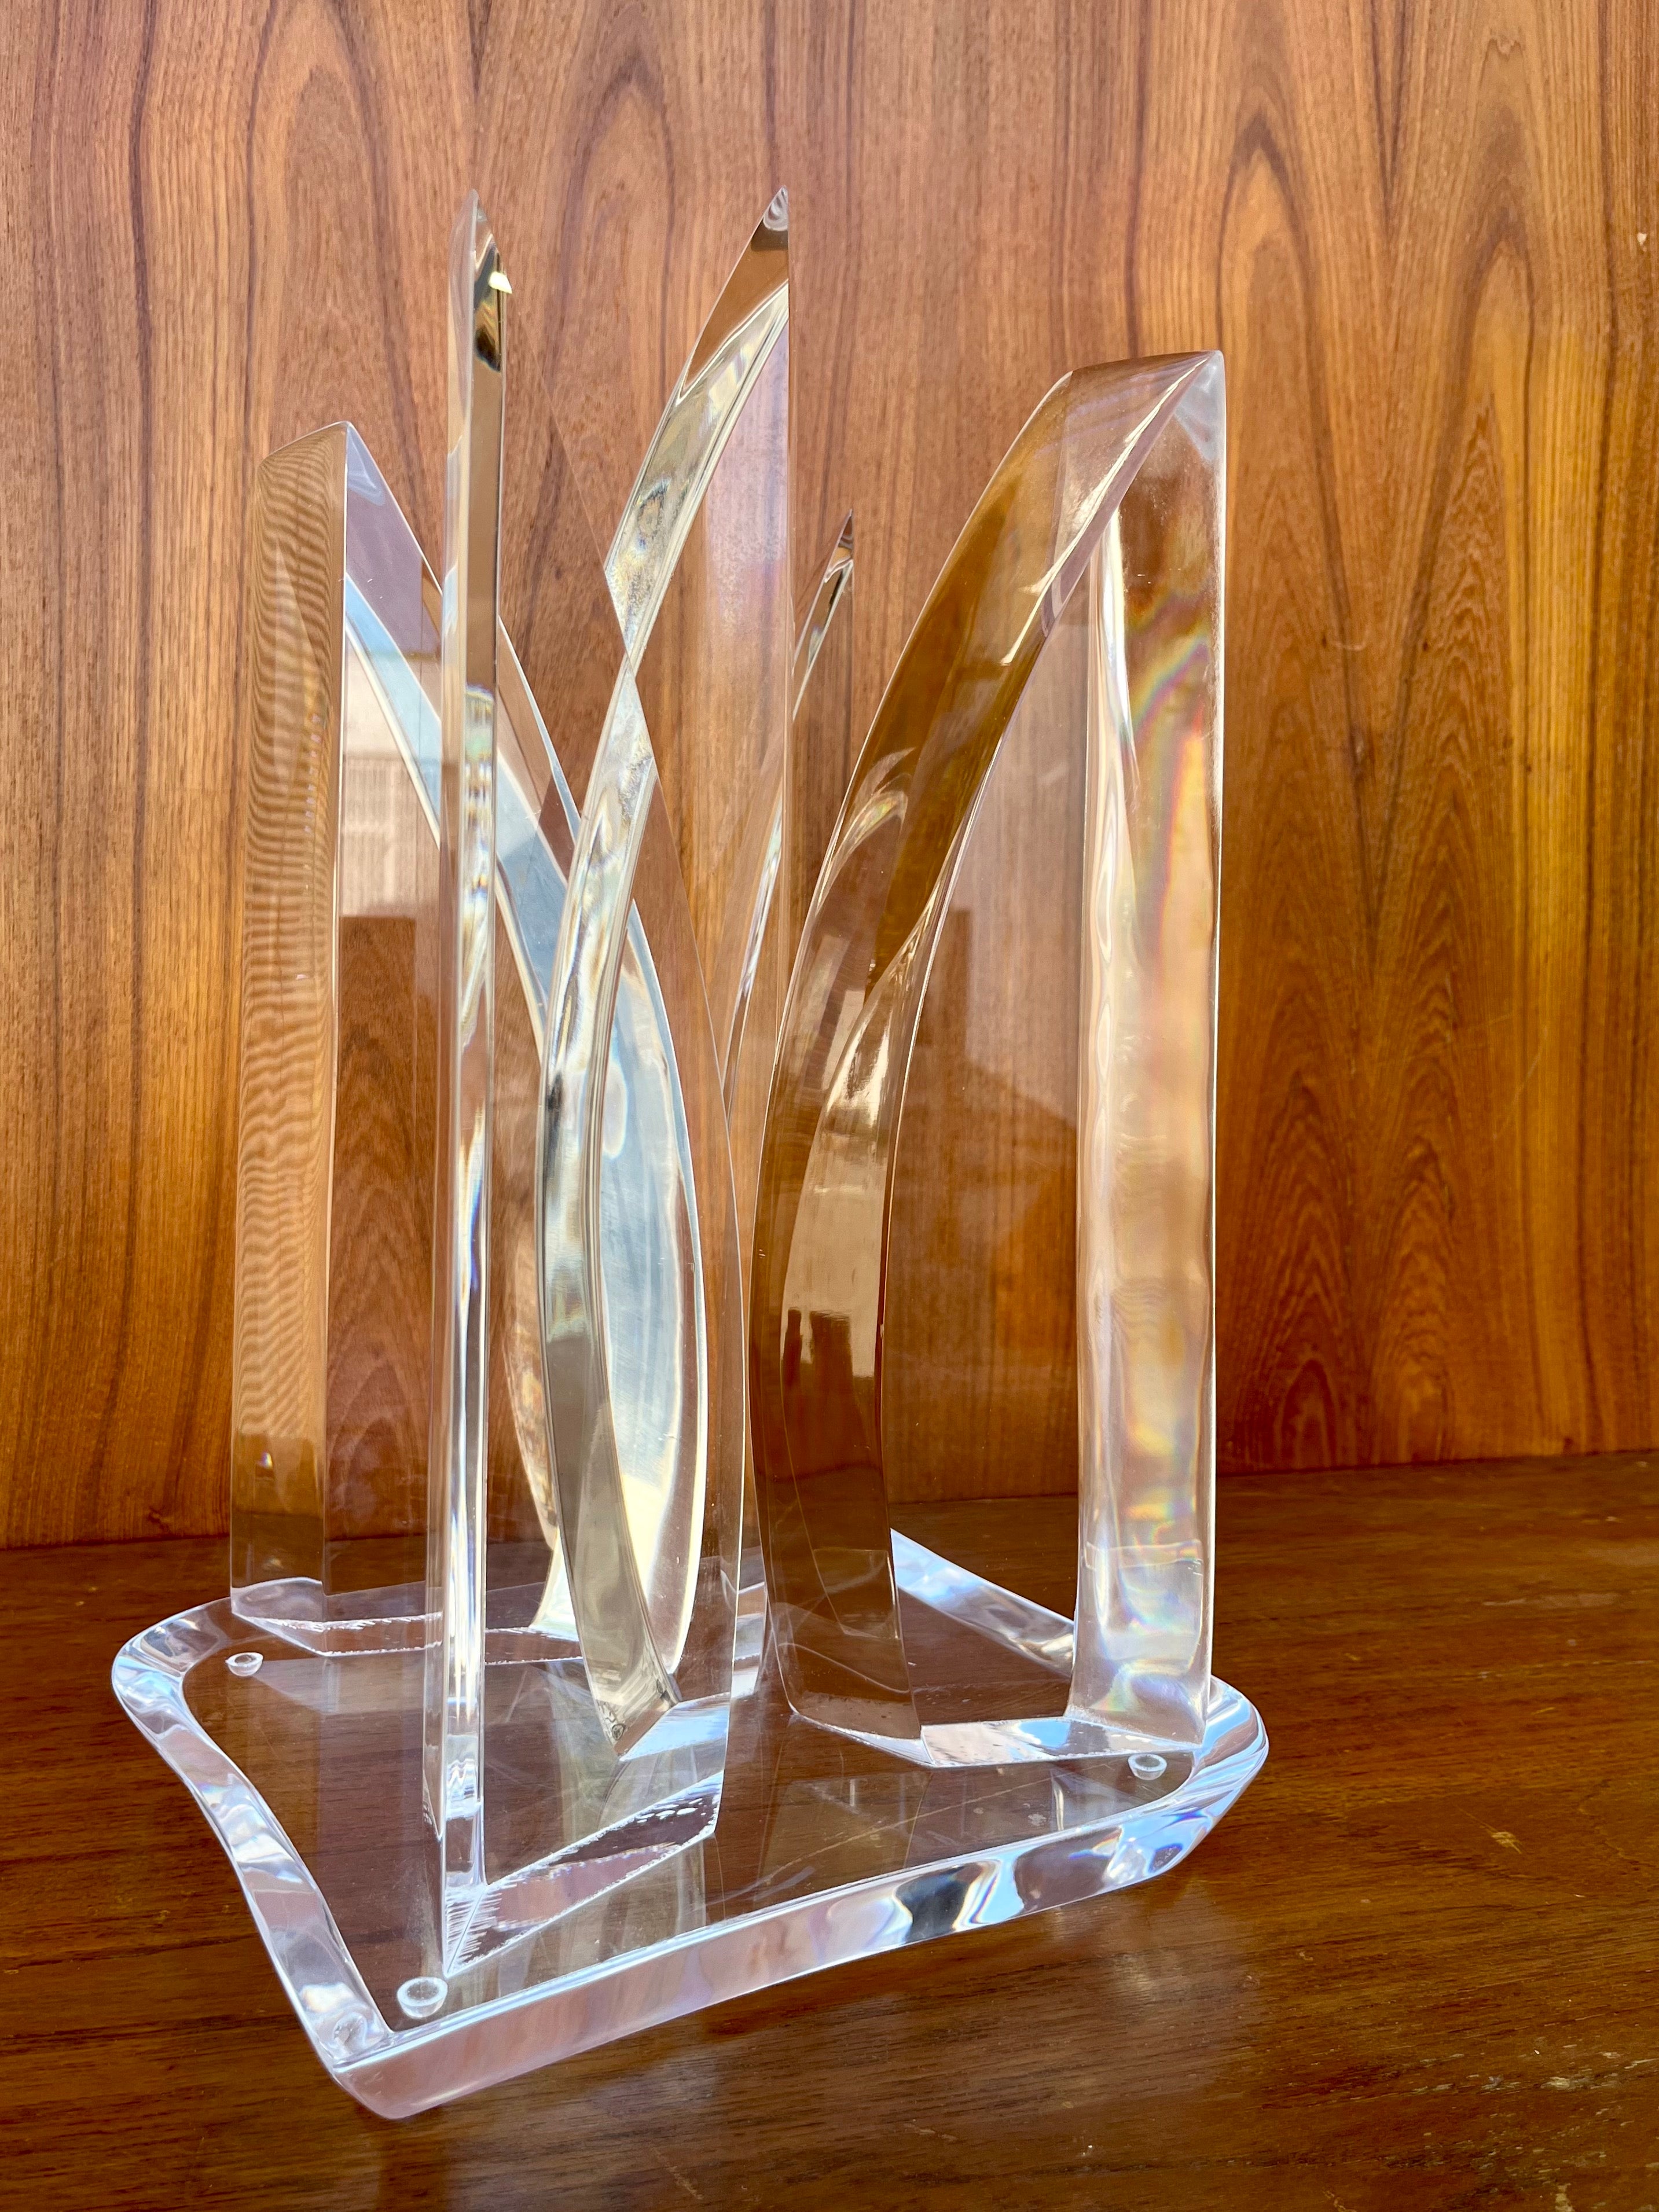 Large Mid-Century Modern Abstract Lucite Sculpture in the Hivo Van Teal's Style. Circa 1970s 
Features five three-dimensional curved elements with sharp edges rising from a asymmetric base. 
In near mint original condition with very minor signs of